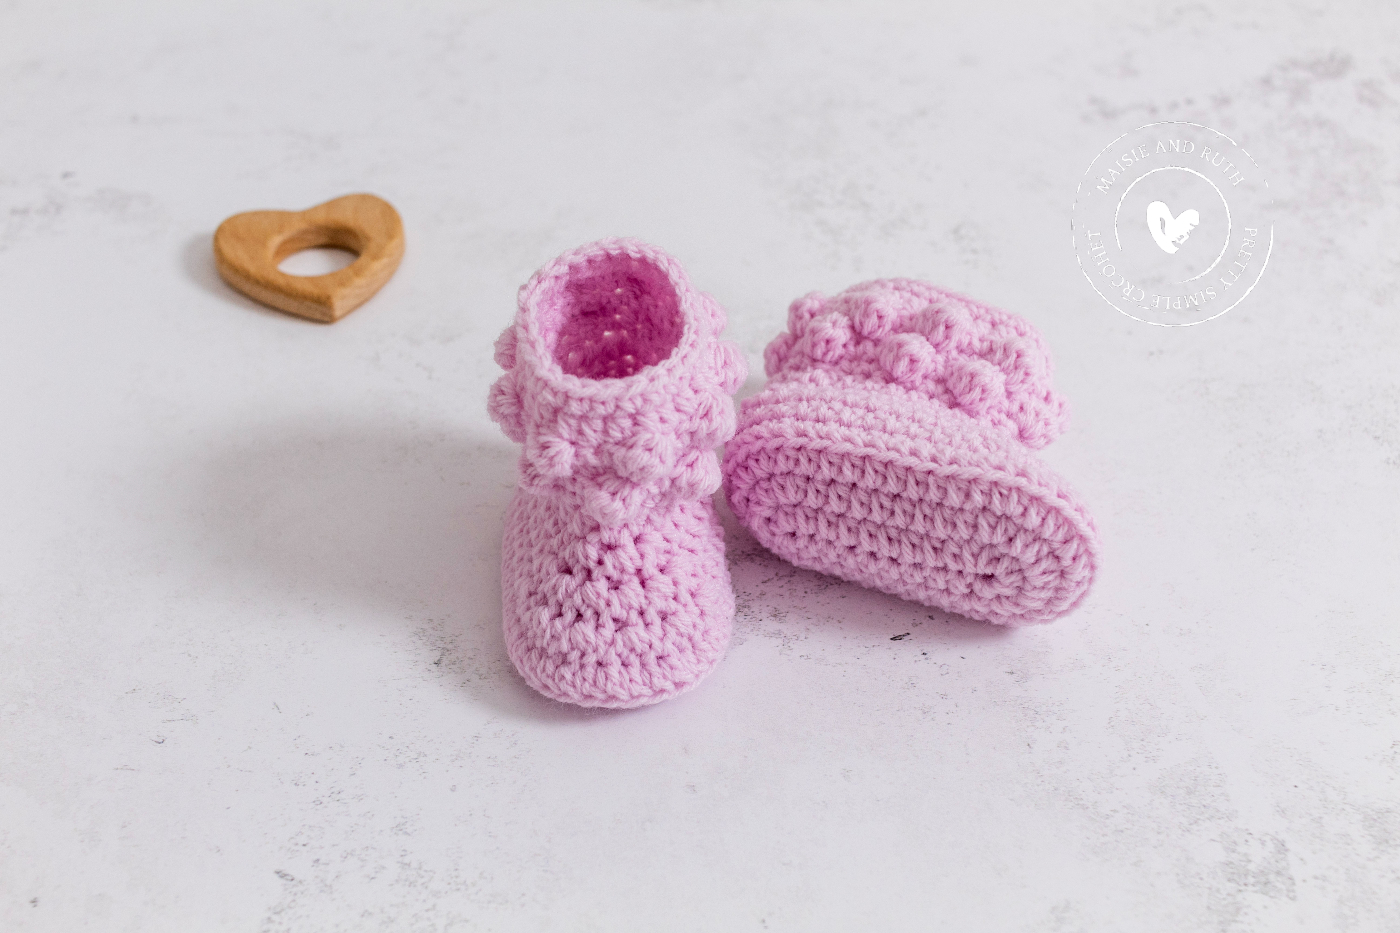 CUTE PAIR HAND KNITTED BABY BOOTIES in WHITE 0-3 MONTHS 1 